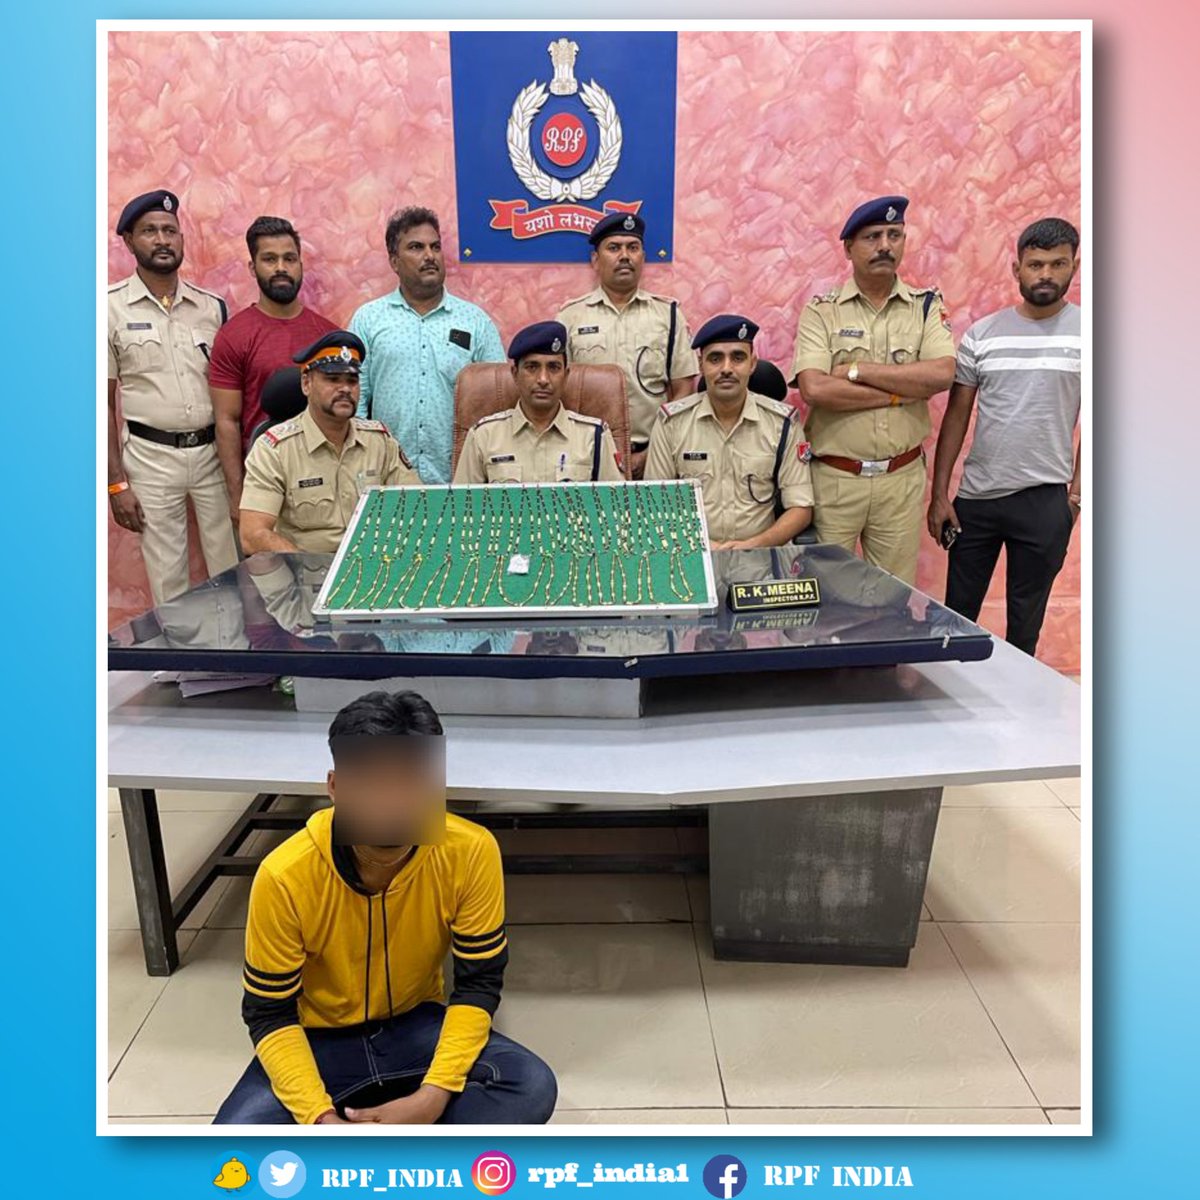 United against crime ! 

#RPF Bhusawal in coordination with Kurla Police, Mumbai cracked a case with arrest of the prime suspect involved in a ₹28 lakh gold theft at Bhusawal station.
#OperationRailPrahari  #cooperation #TogetherWeCan